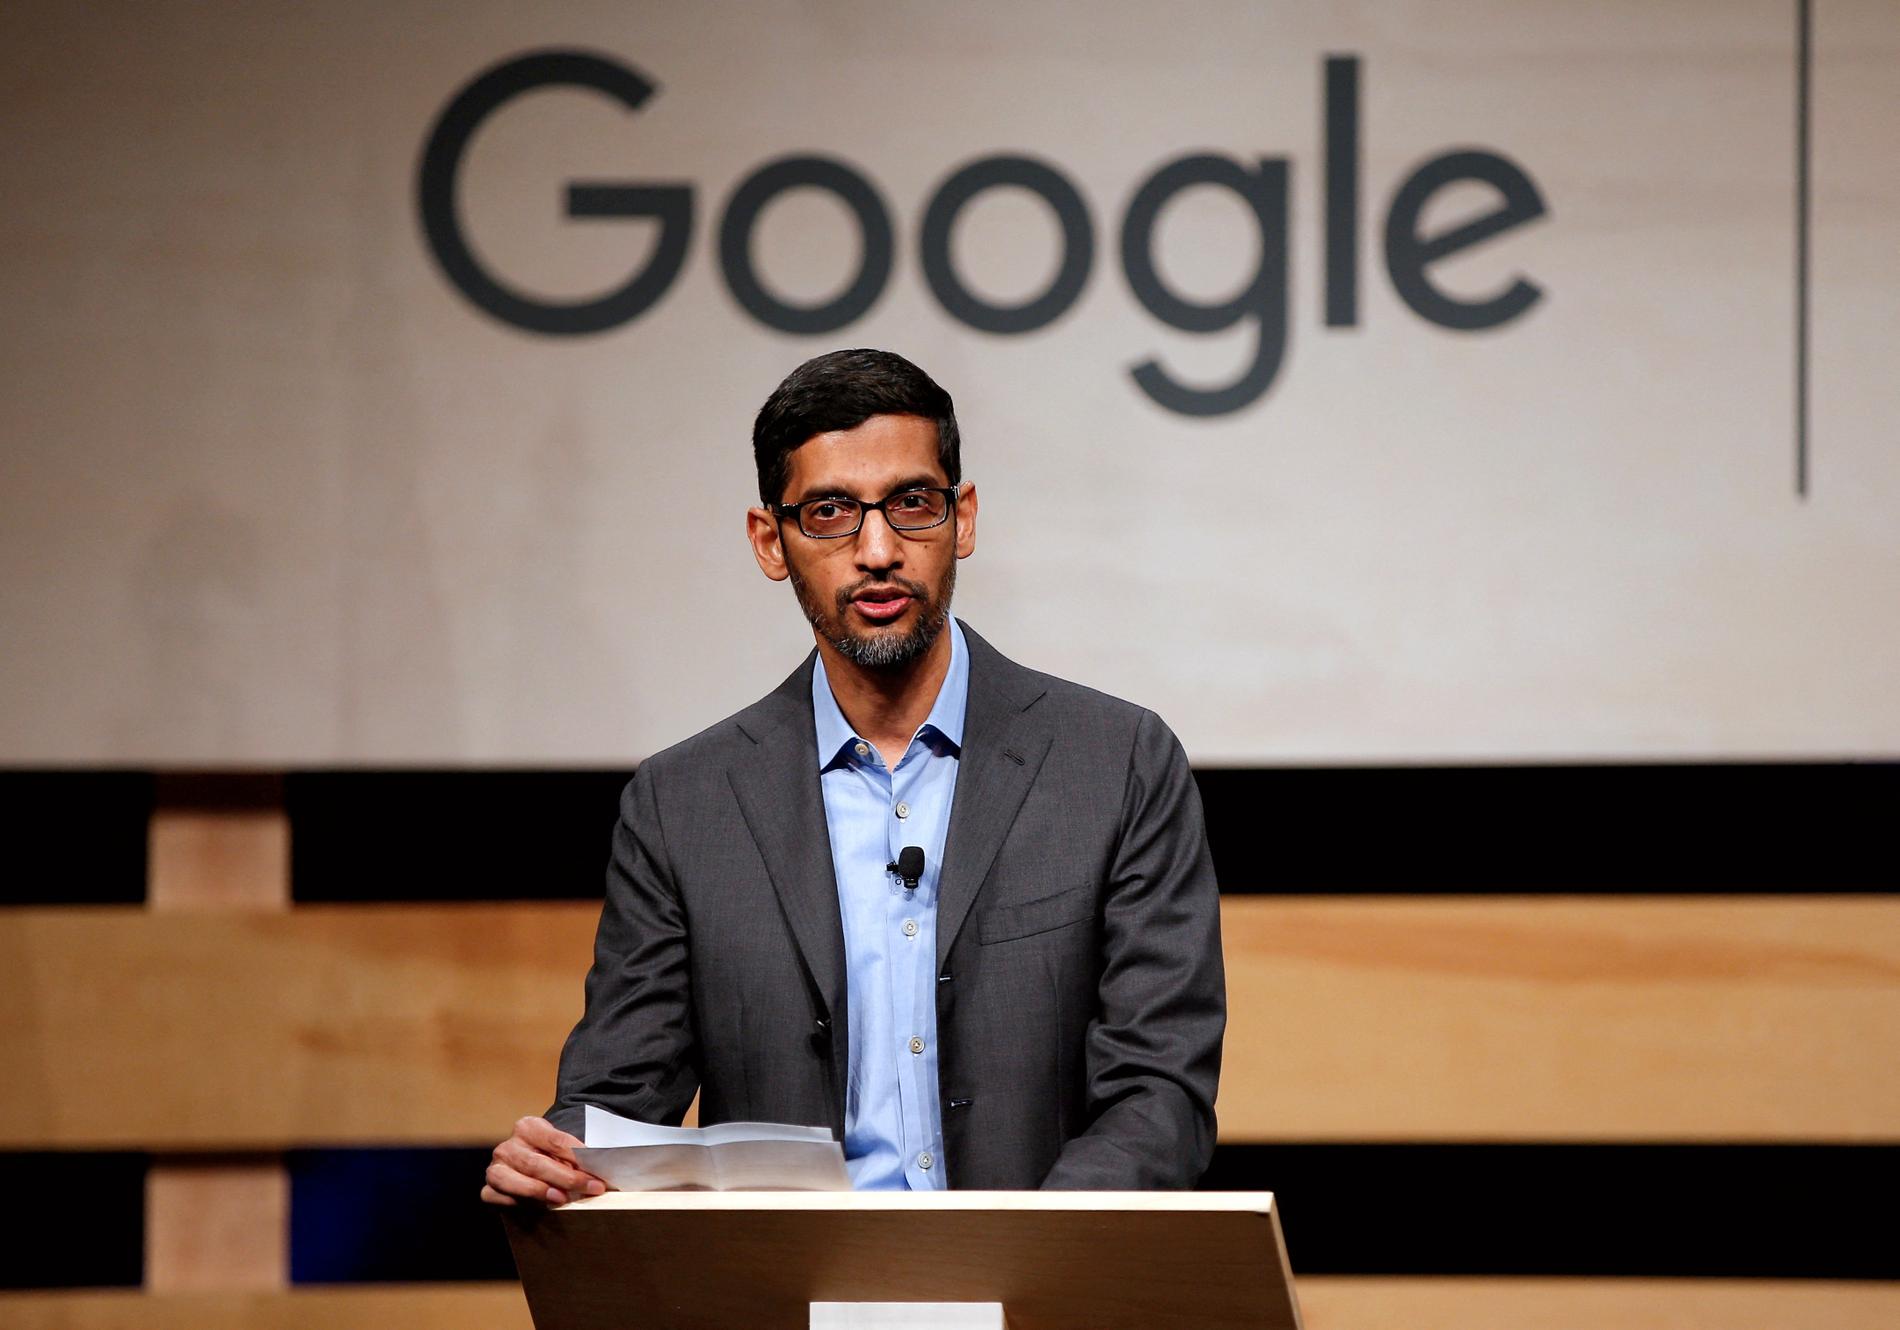 Alphabet rages in the post-earnings boom market - E24